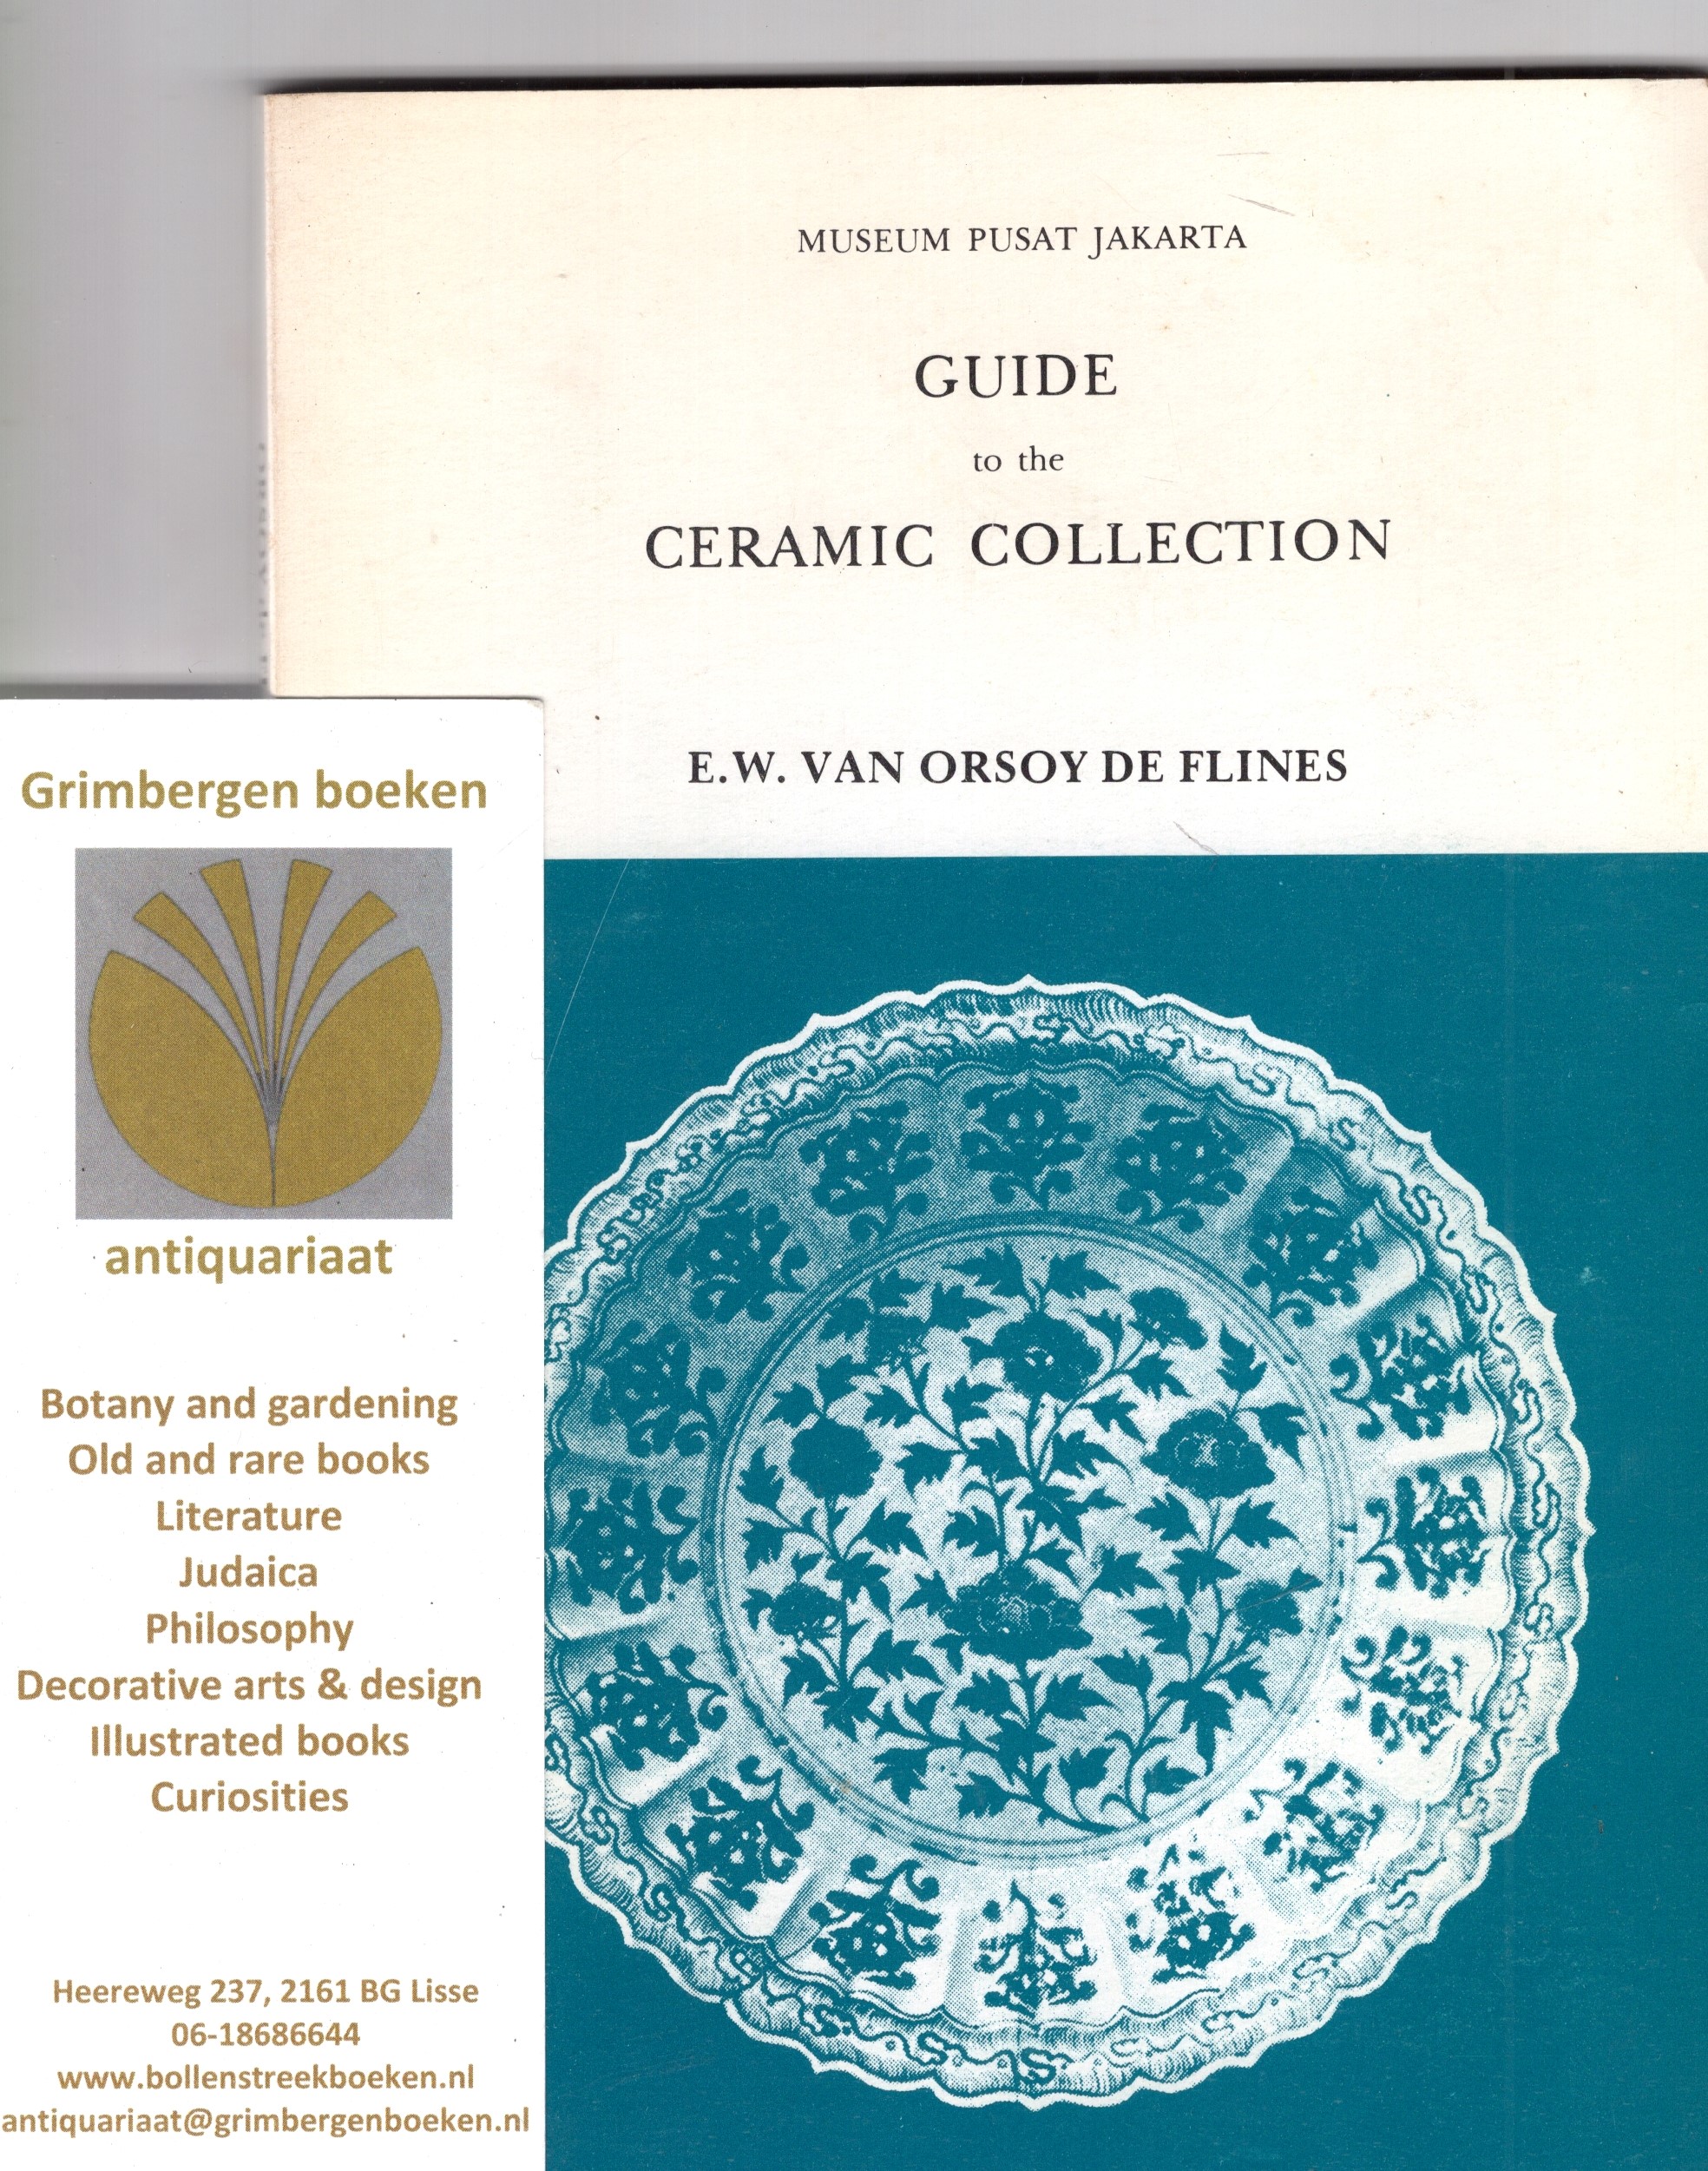 Orsoy de Flines, E.W. van - Guide to the ceramic collection of the Museum Pusat Jakarta